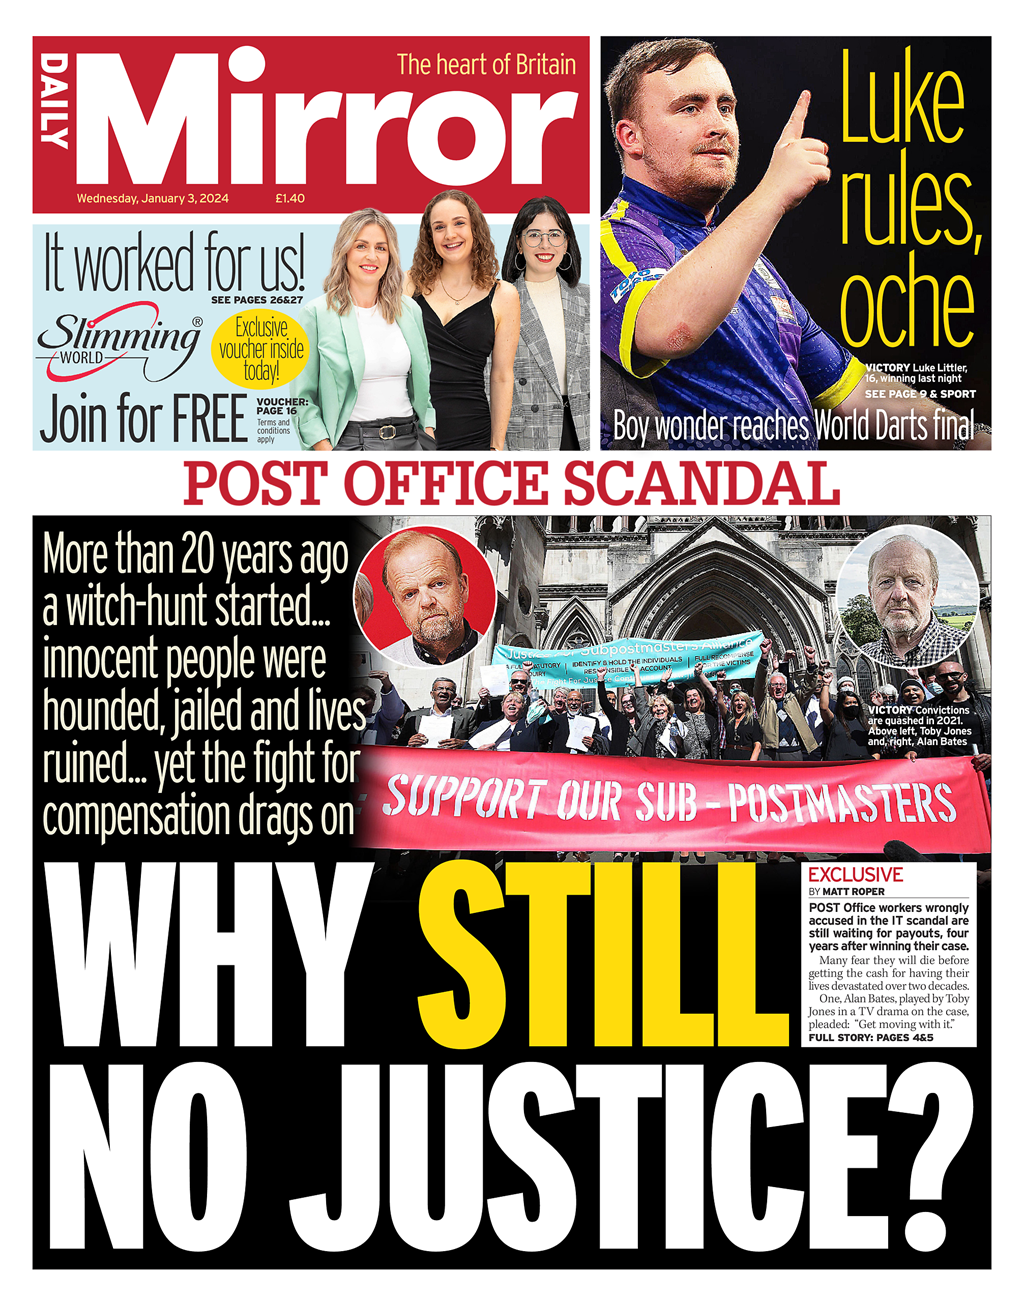 Daily Mirror 1 